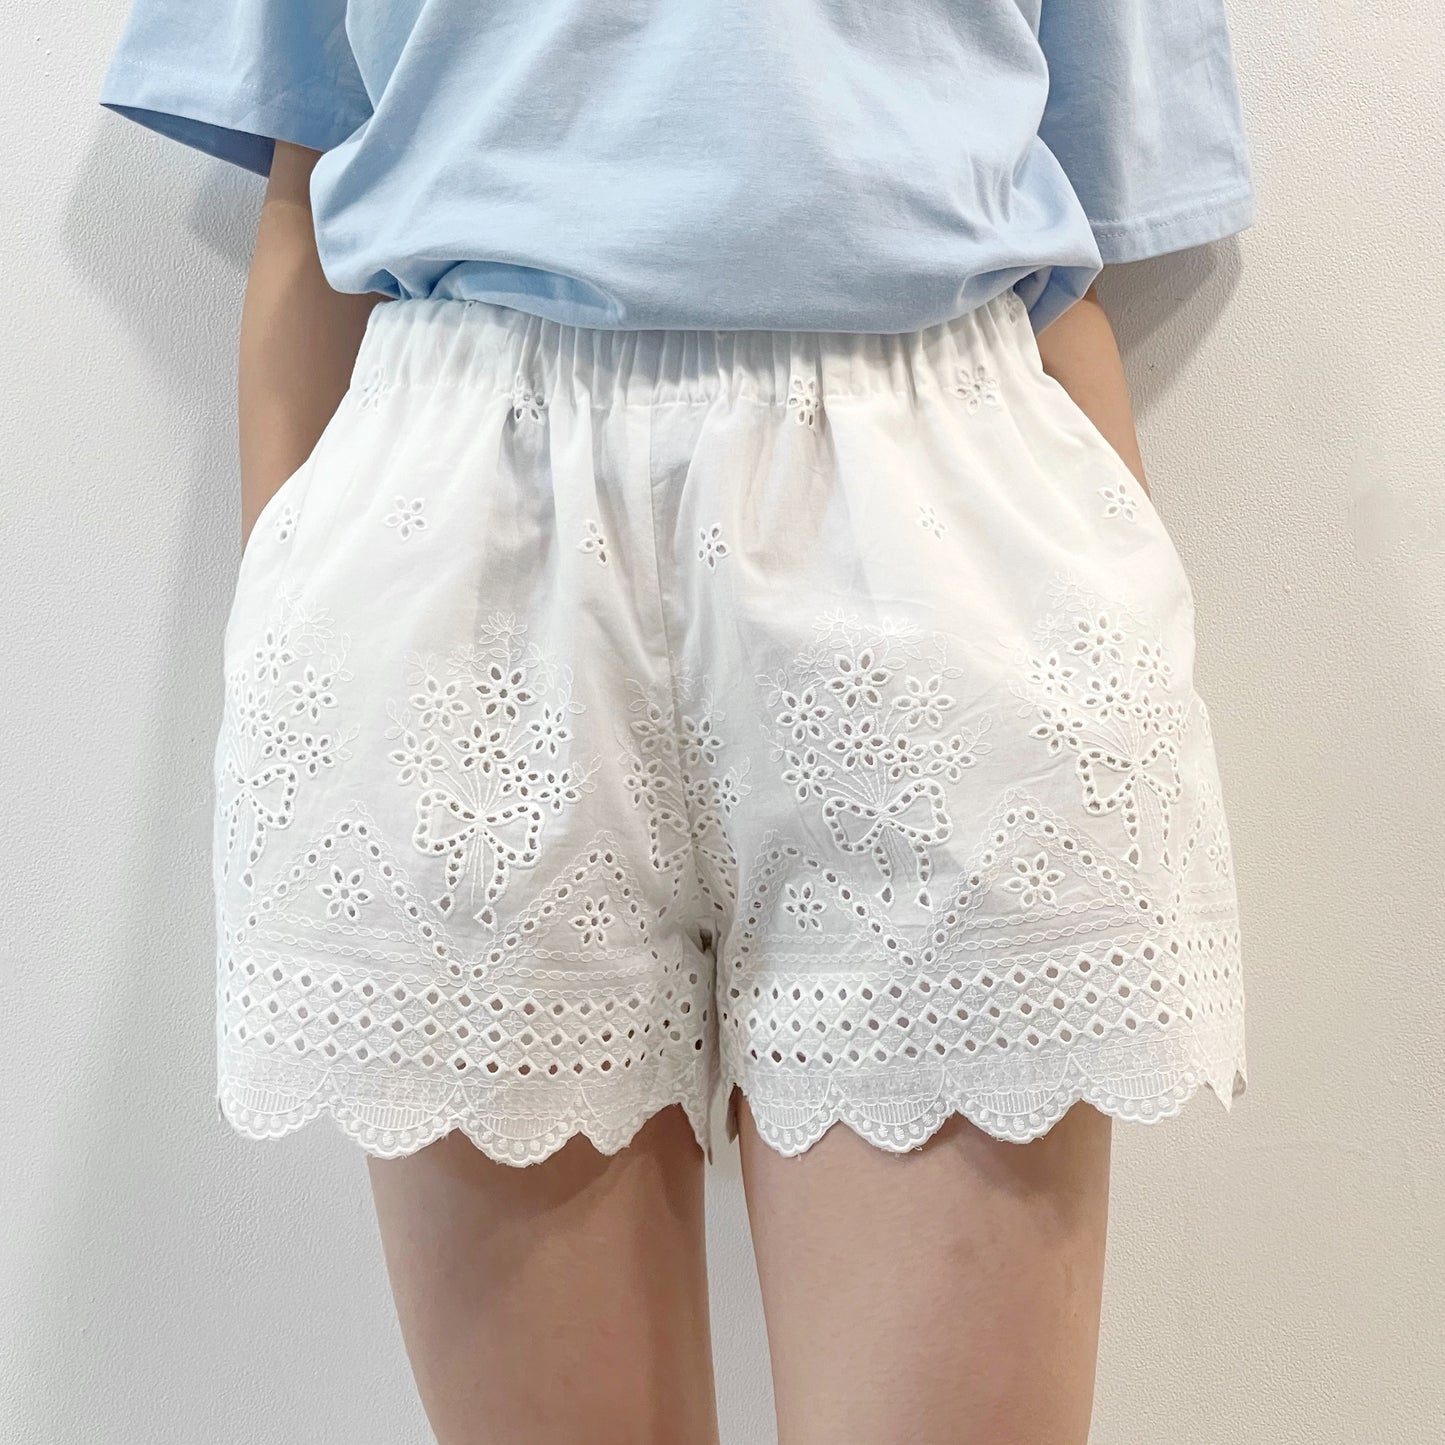 Love me or leave me shorts / White / レースショートパンツ